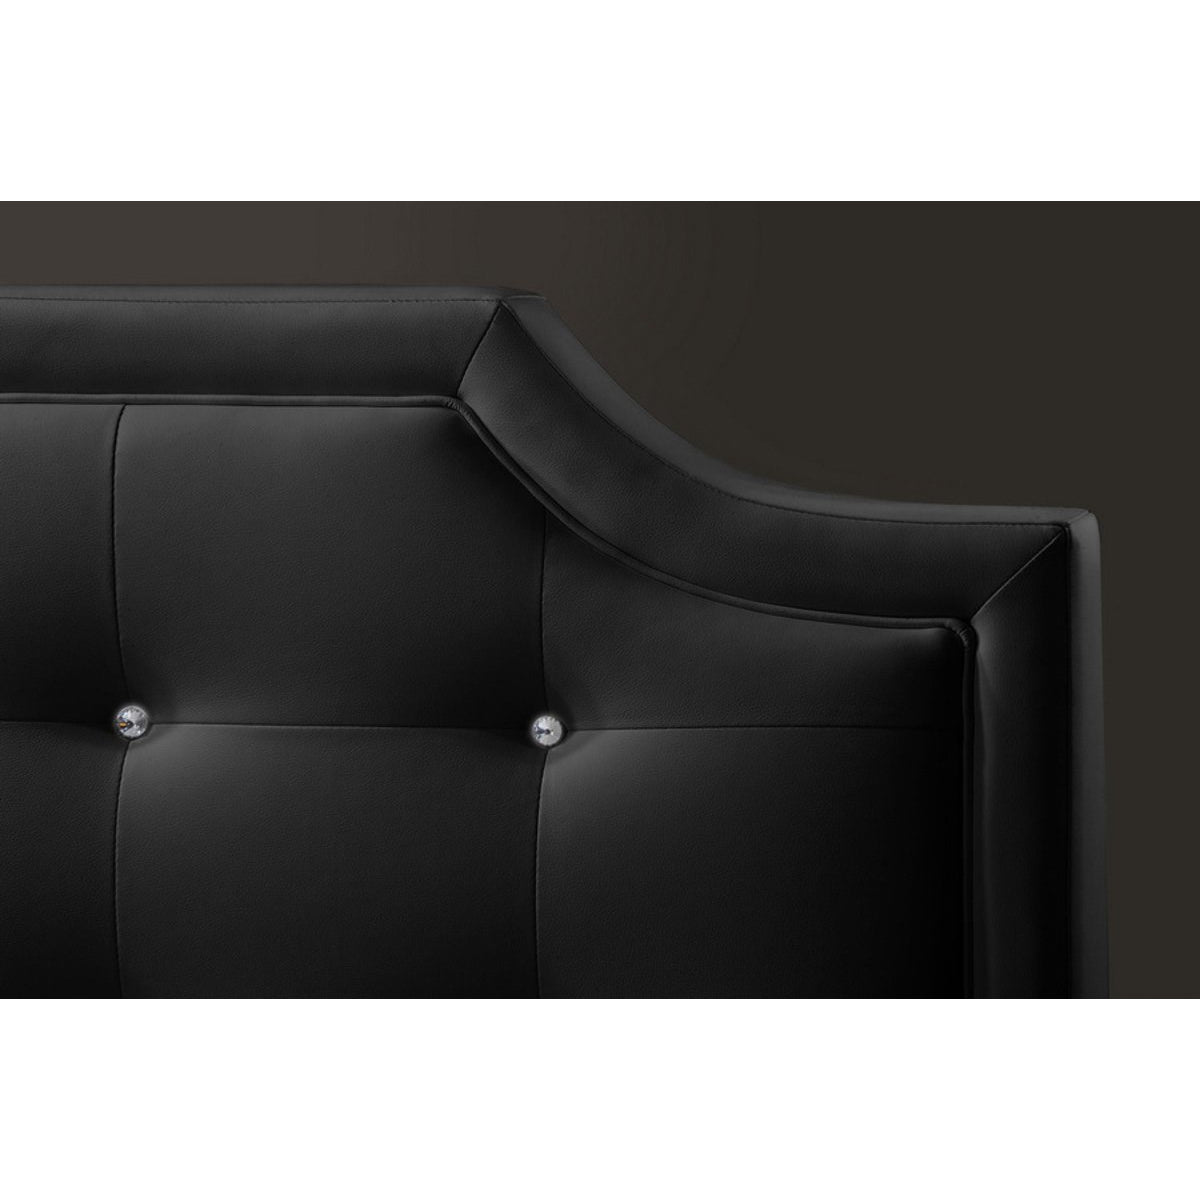 Baxton Studio Carlotta Black Modern Bed with Upholstered Headboard - Queen Size Baxton Studio-beds-Minimal And Modern - 3